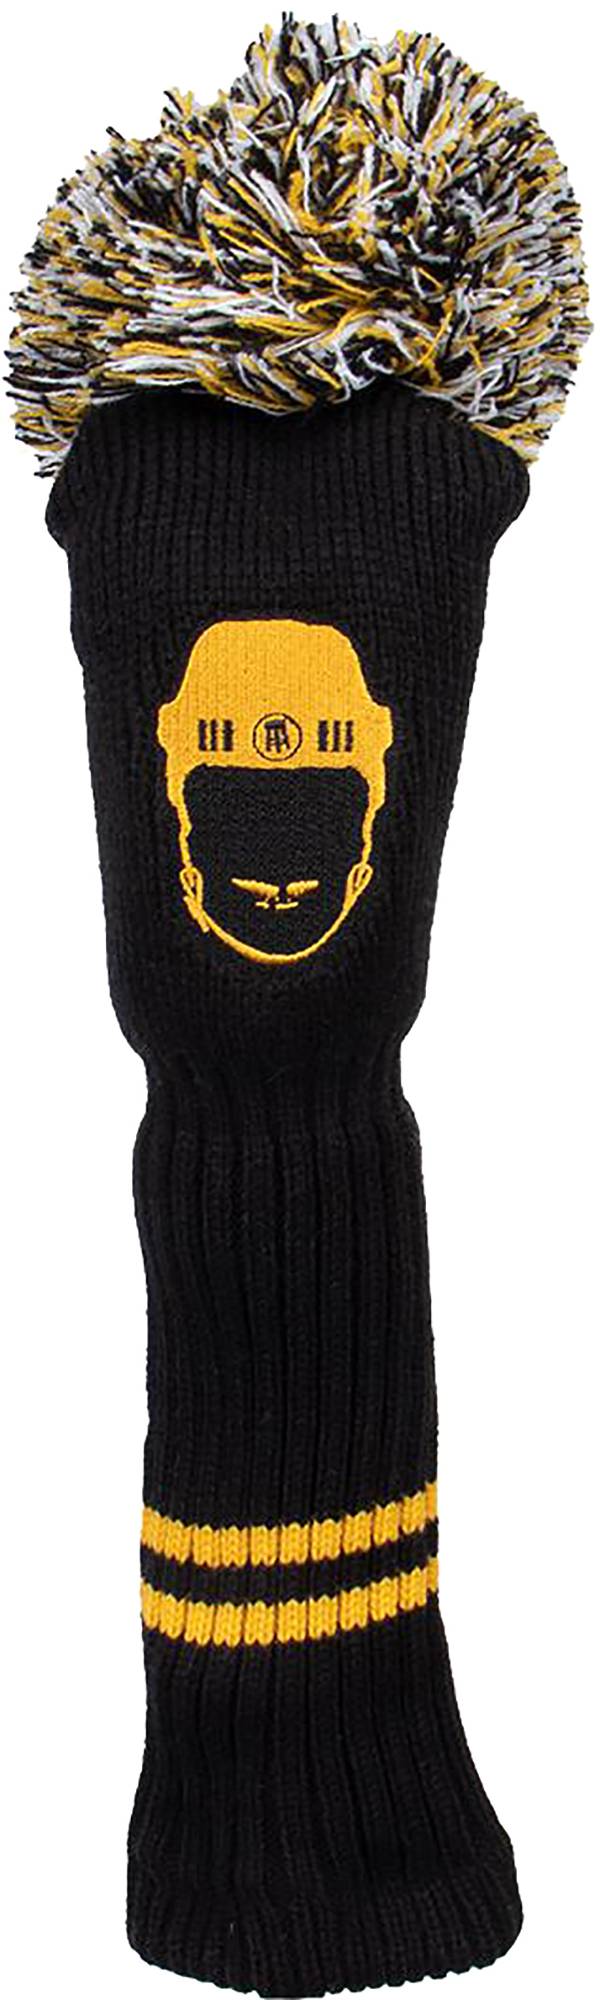 Barstool Sports Spittin' Chiclets Knit Driver Headcover product image